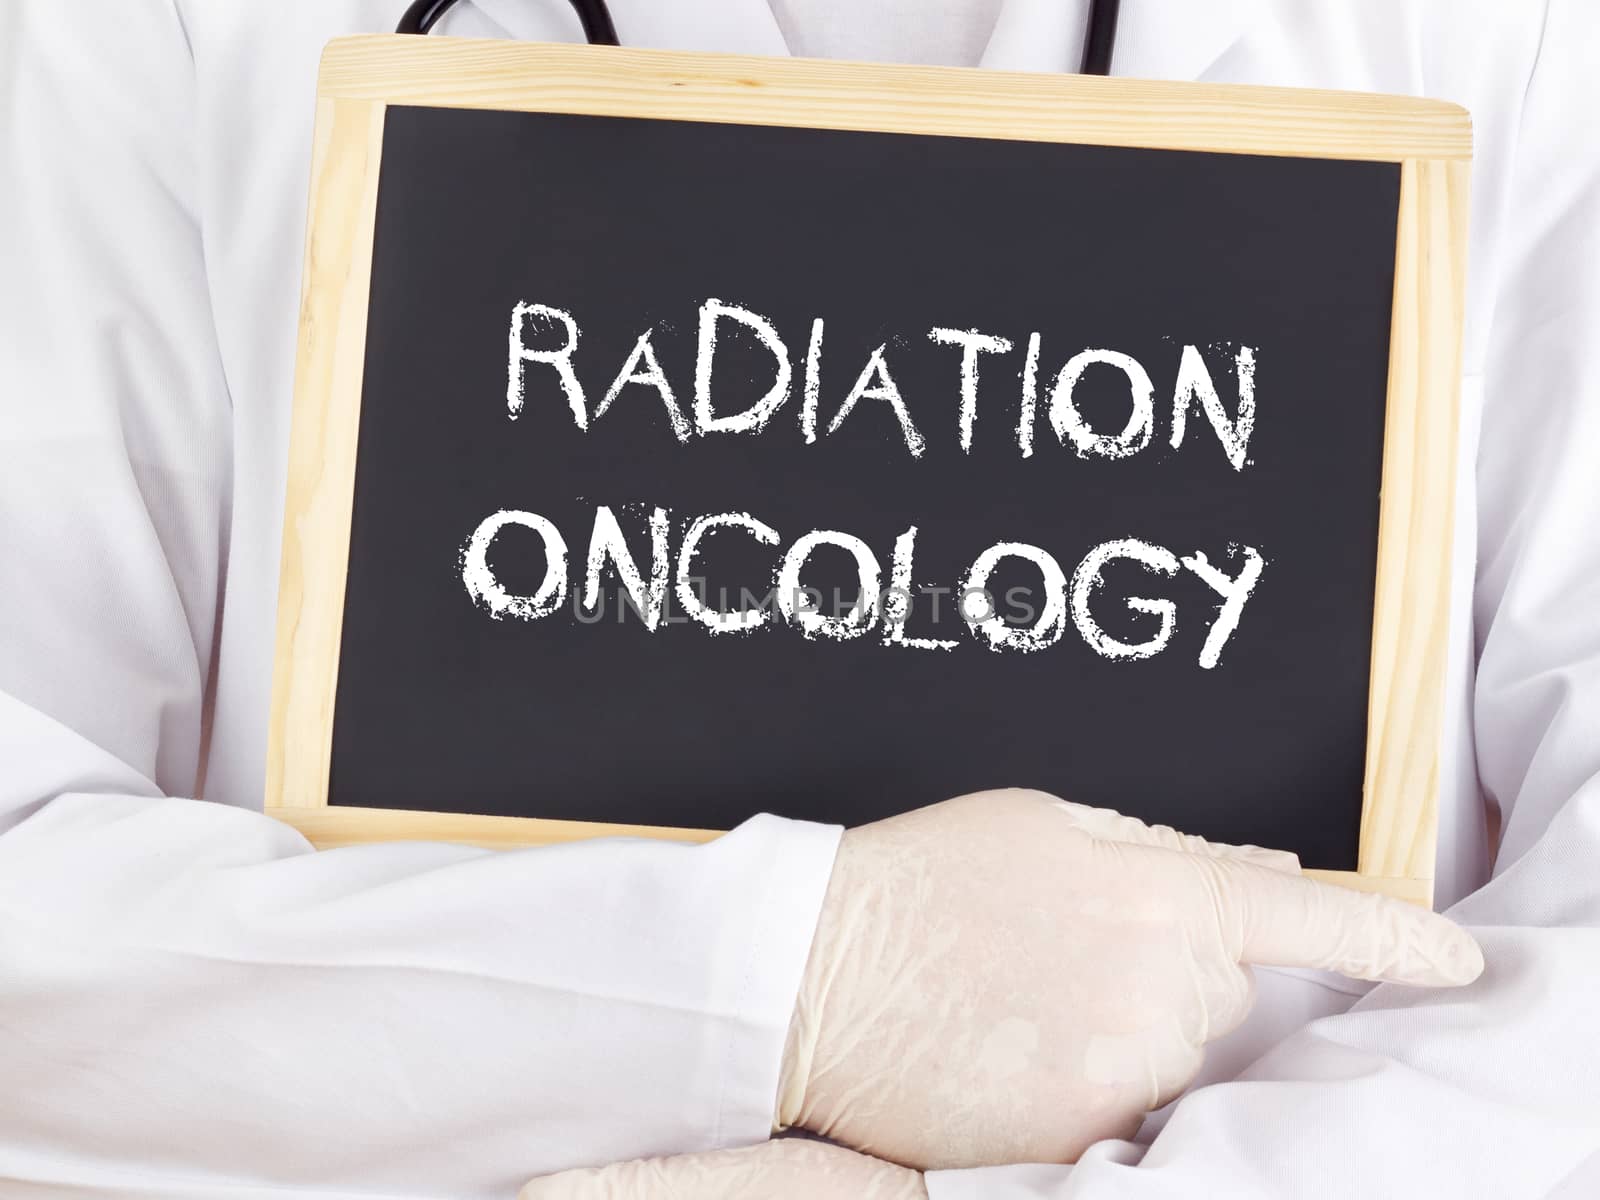 Doctor shows information: radiation oncology by gwolters